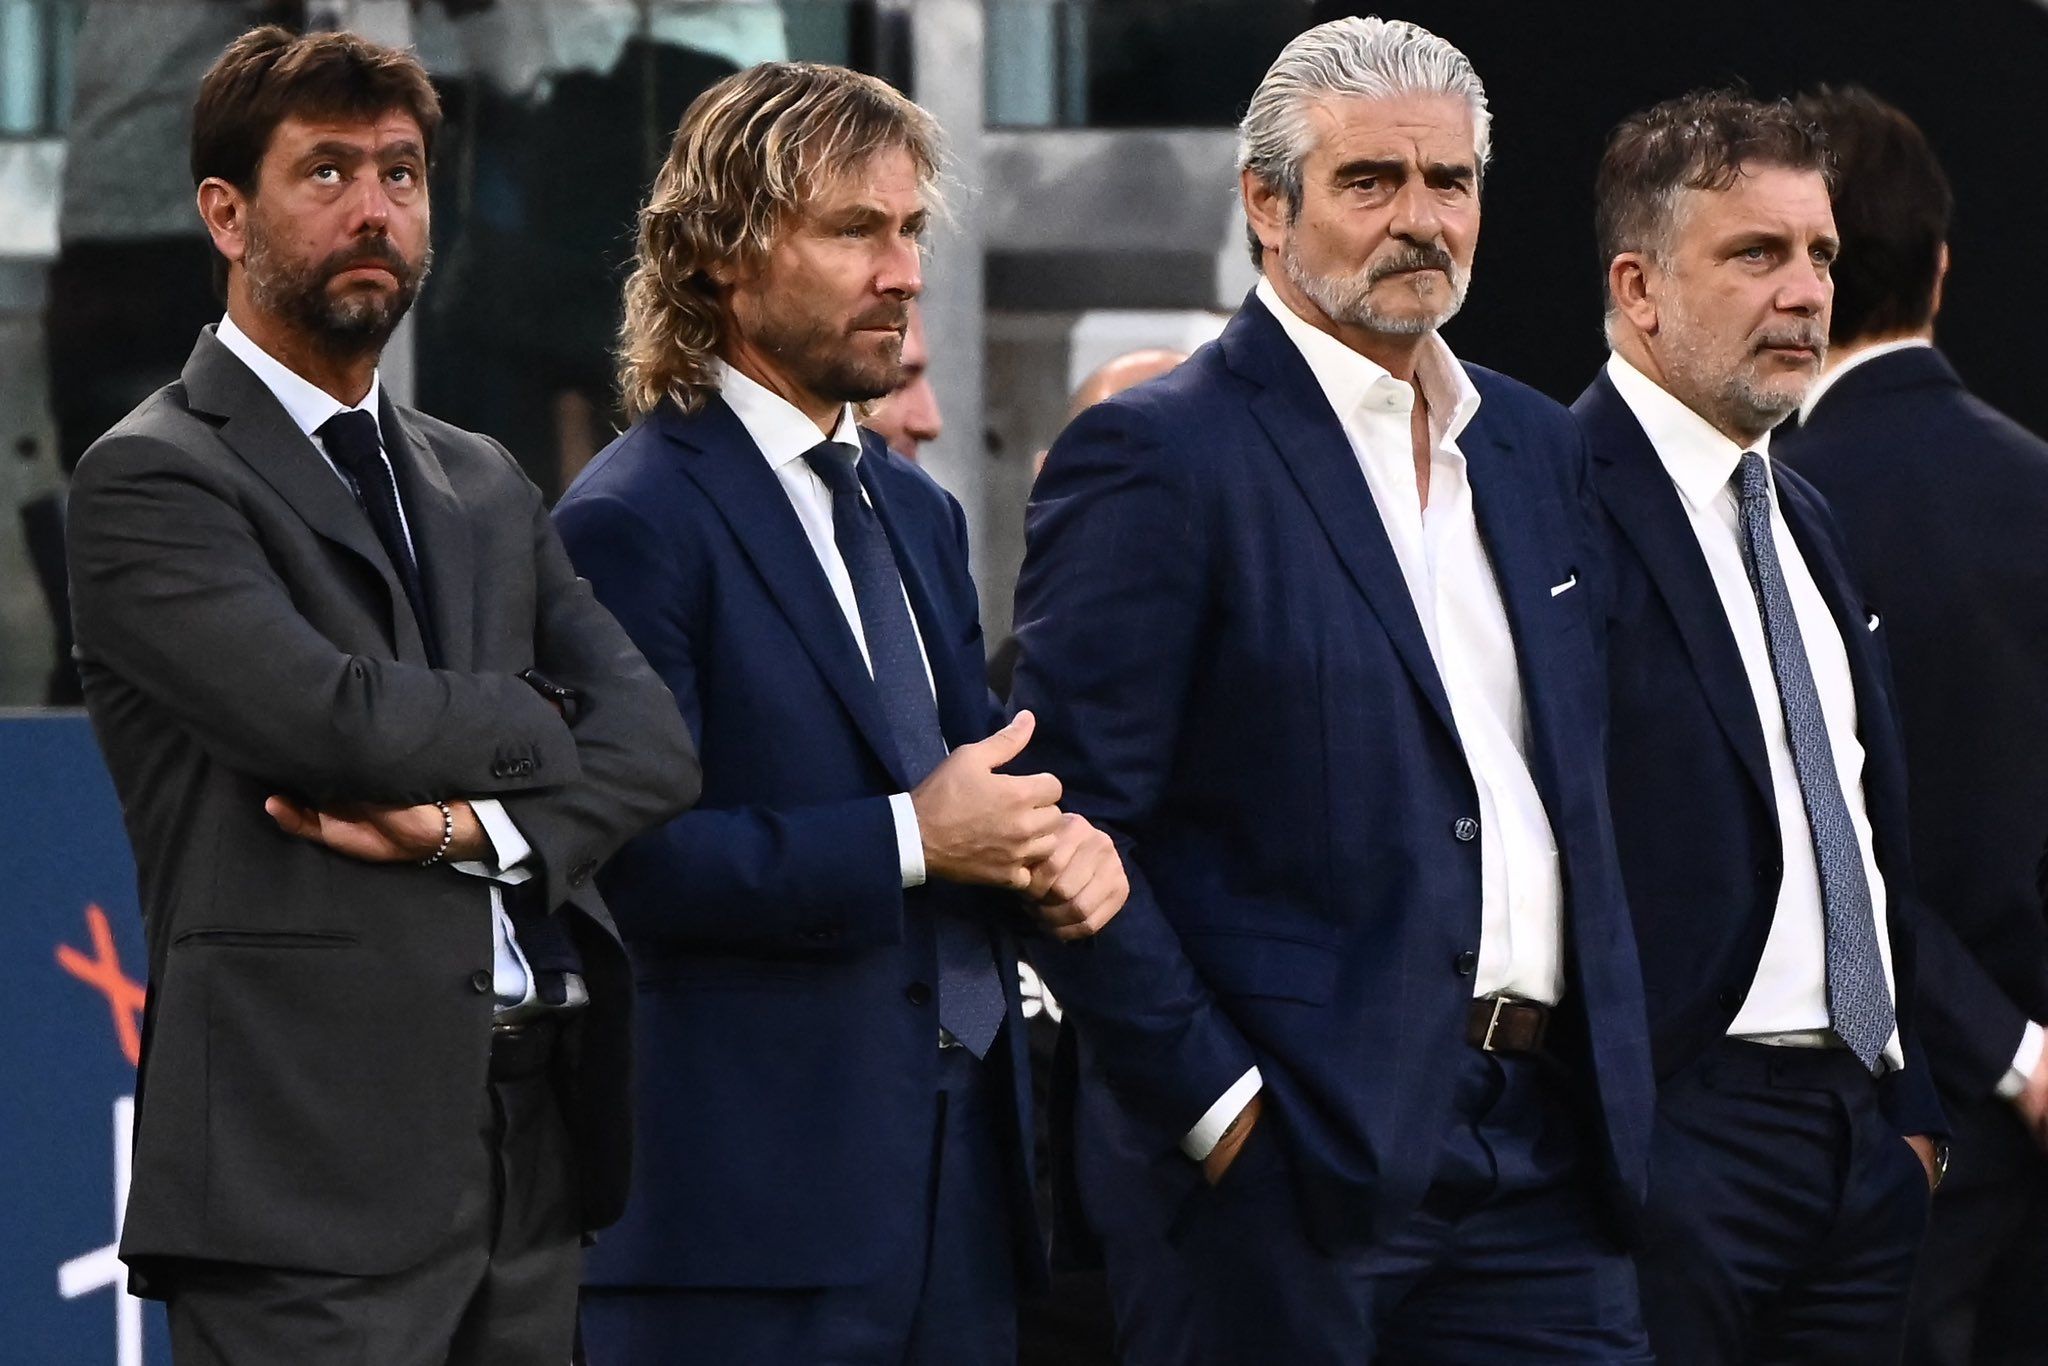 Is former Juventus boss Andrea Agnelli related to Neapolitan nobility?